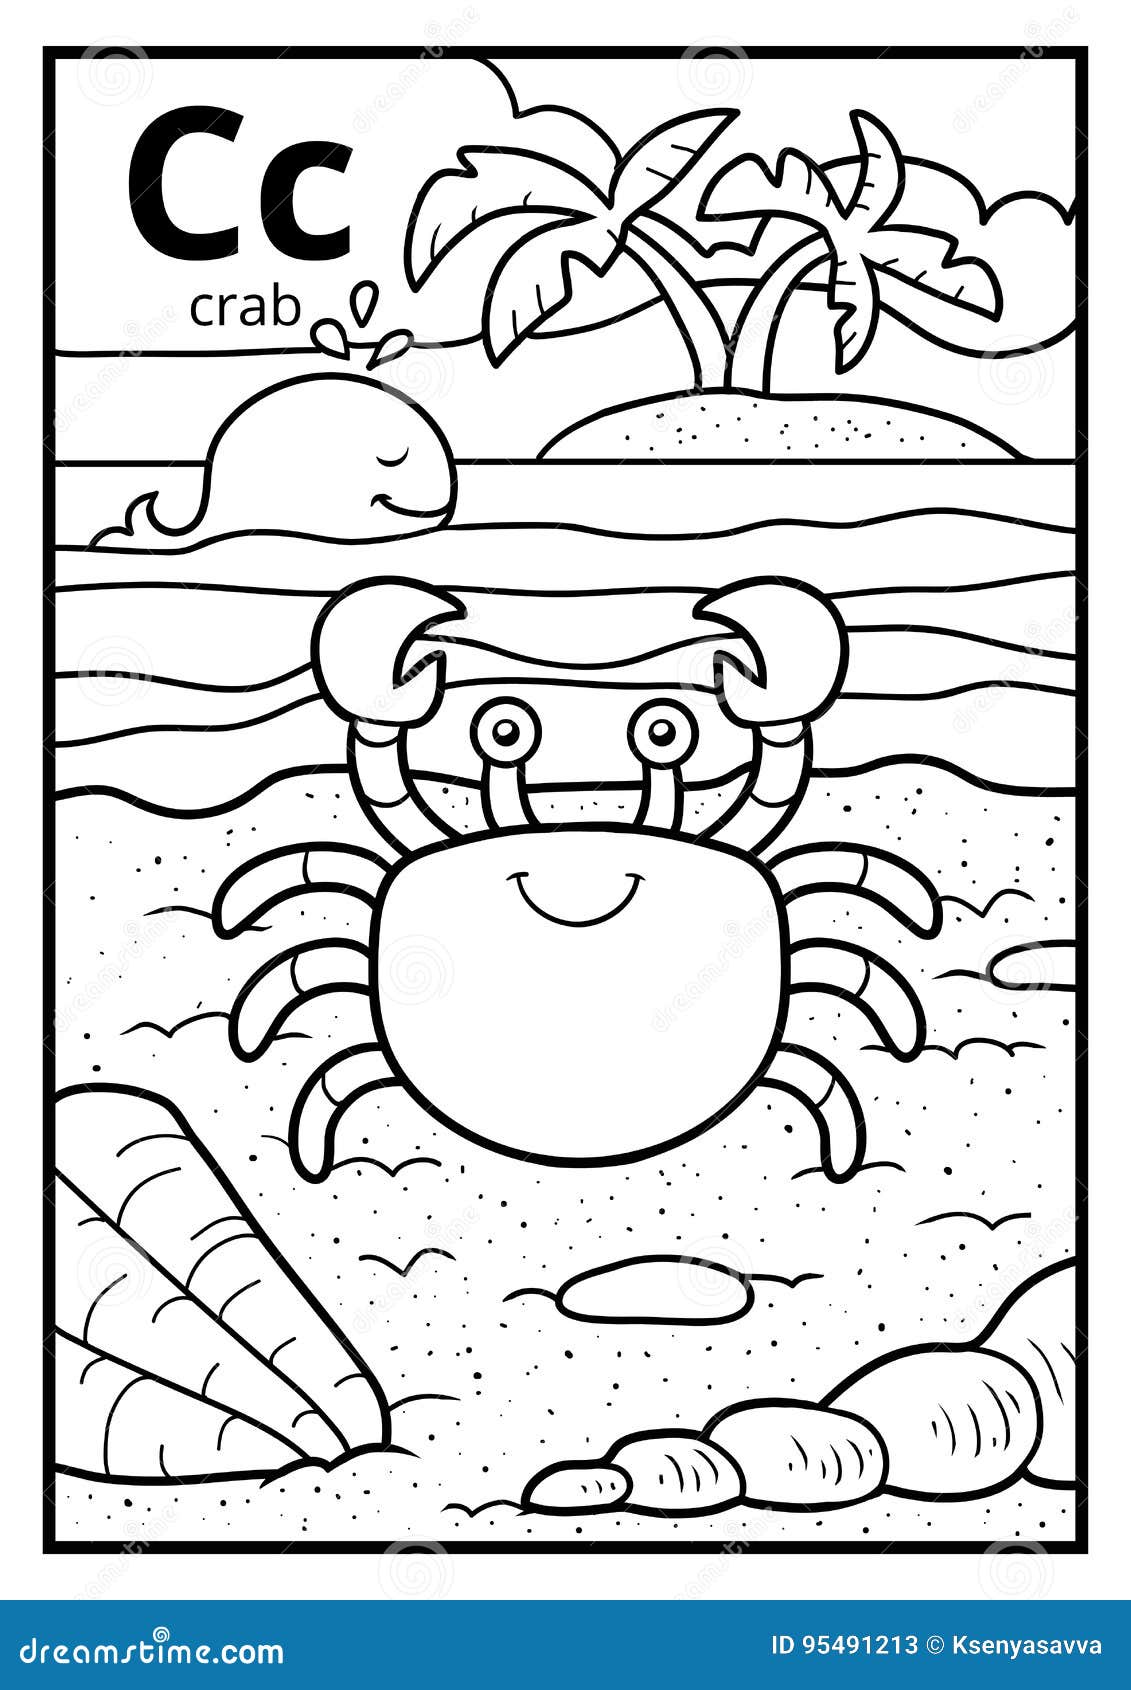 coloring book, colorless alphabet. letter c, crab